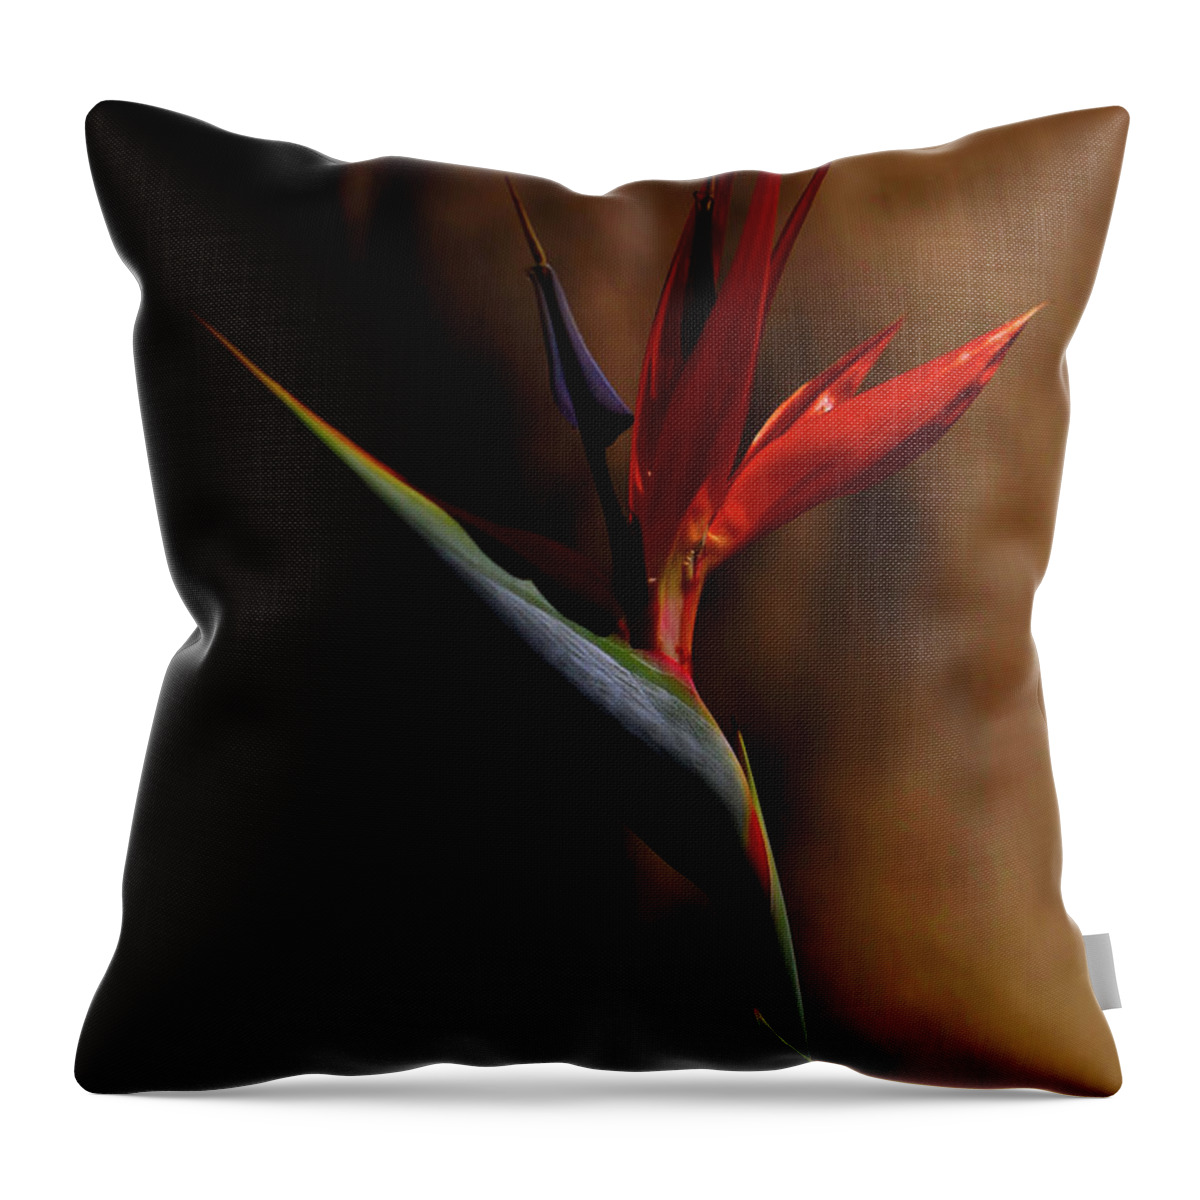 Bird Of Paradise Throw Pillow featuring the photograph Bird Of Paradise by Kandy Hurley